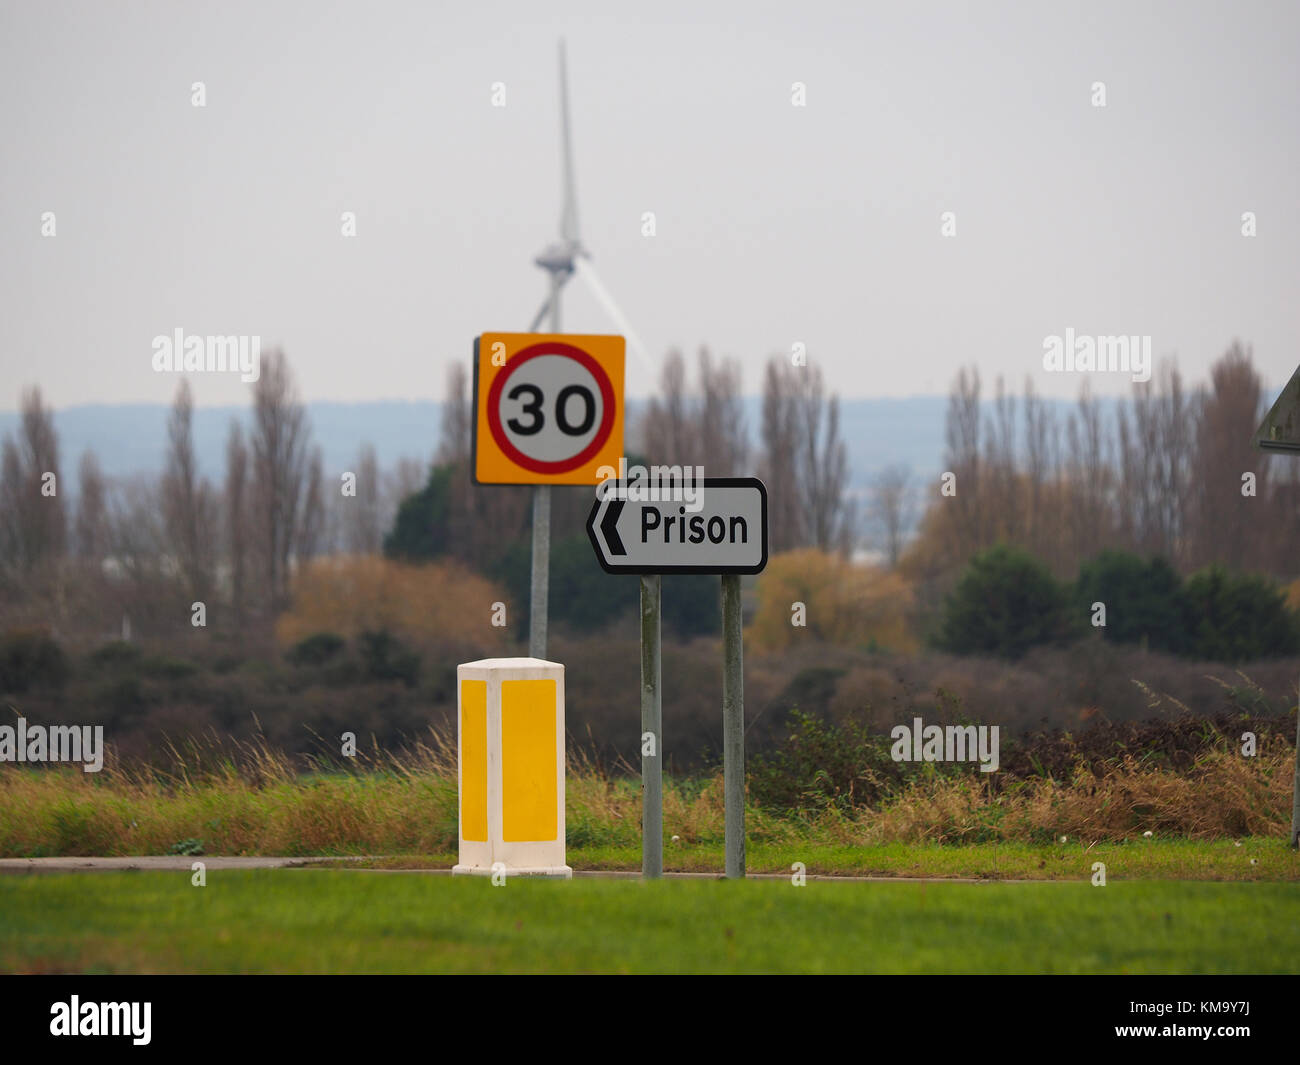 Prison road sign for the Sheppey cluster of prisons (Swaleside, Elmley and Stanford Hill). Stock Photo